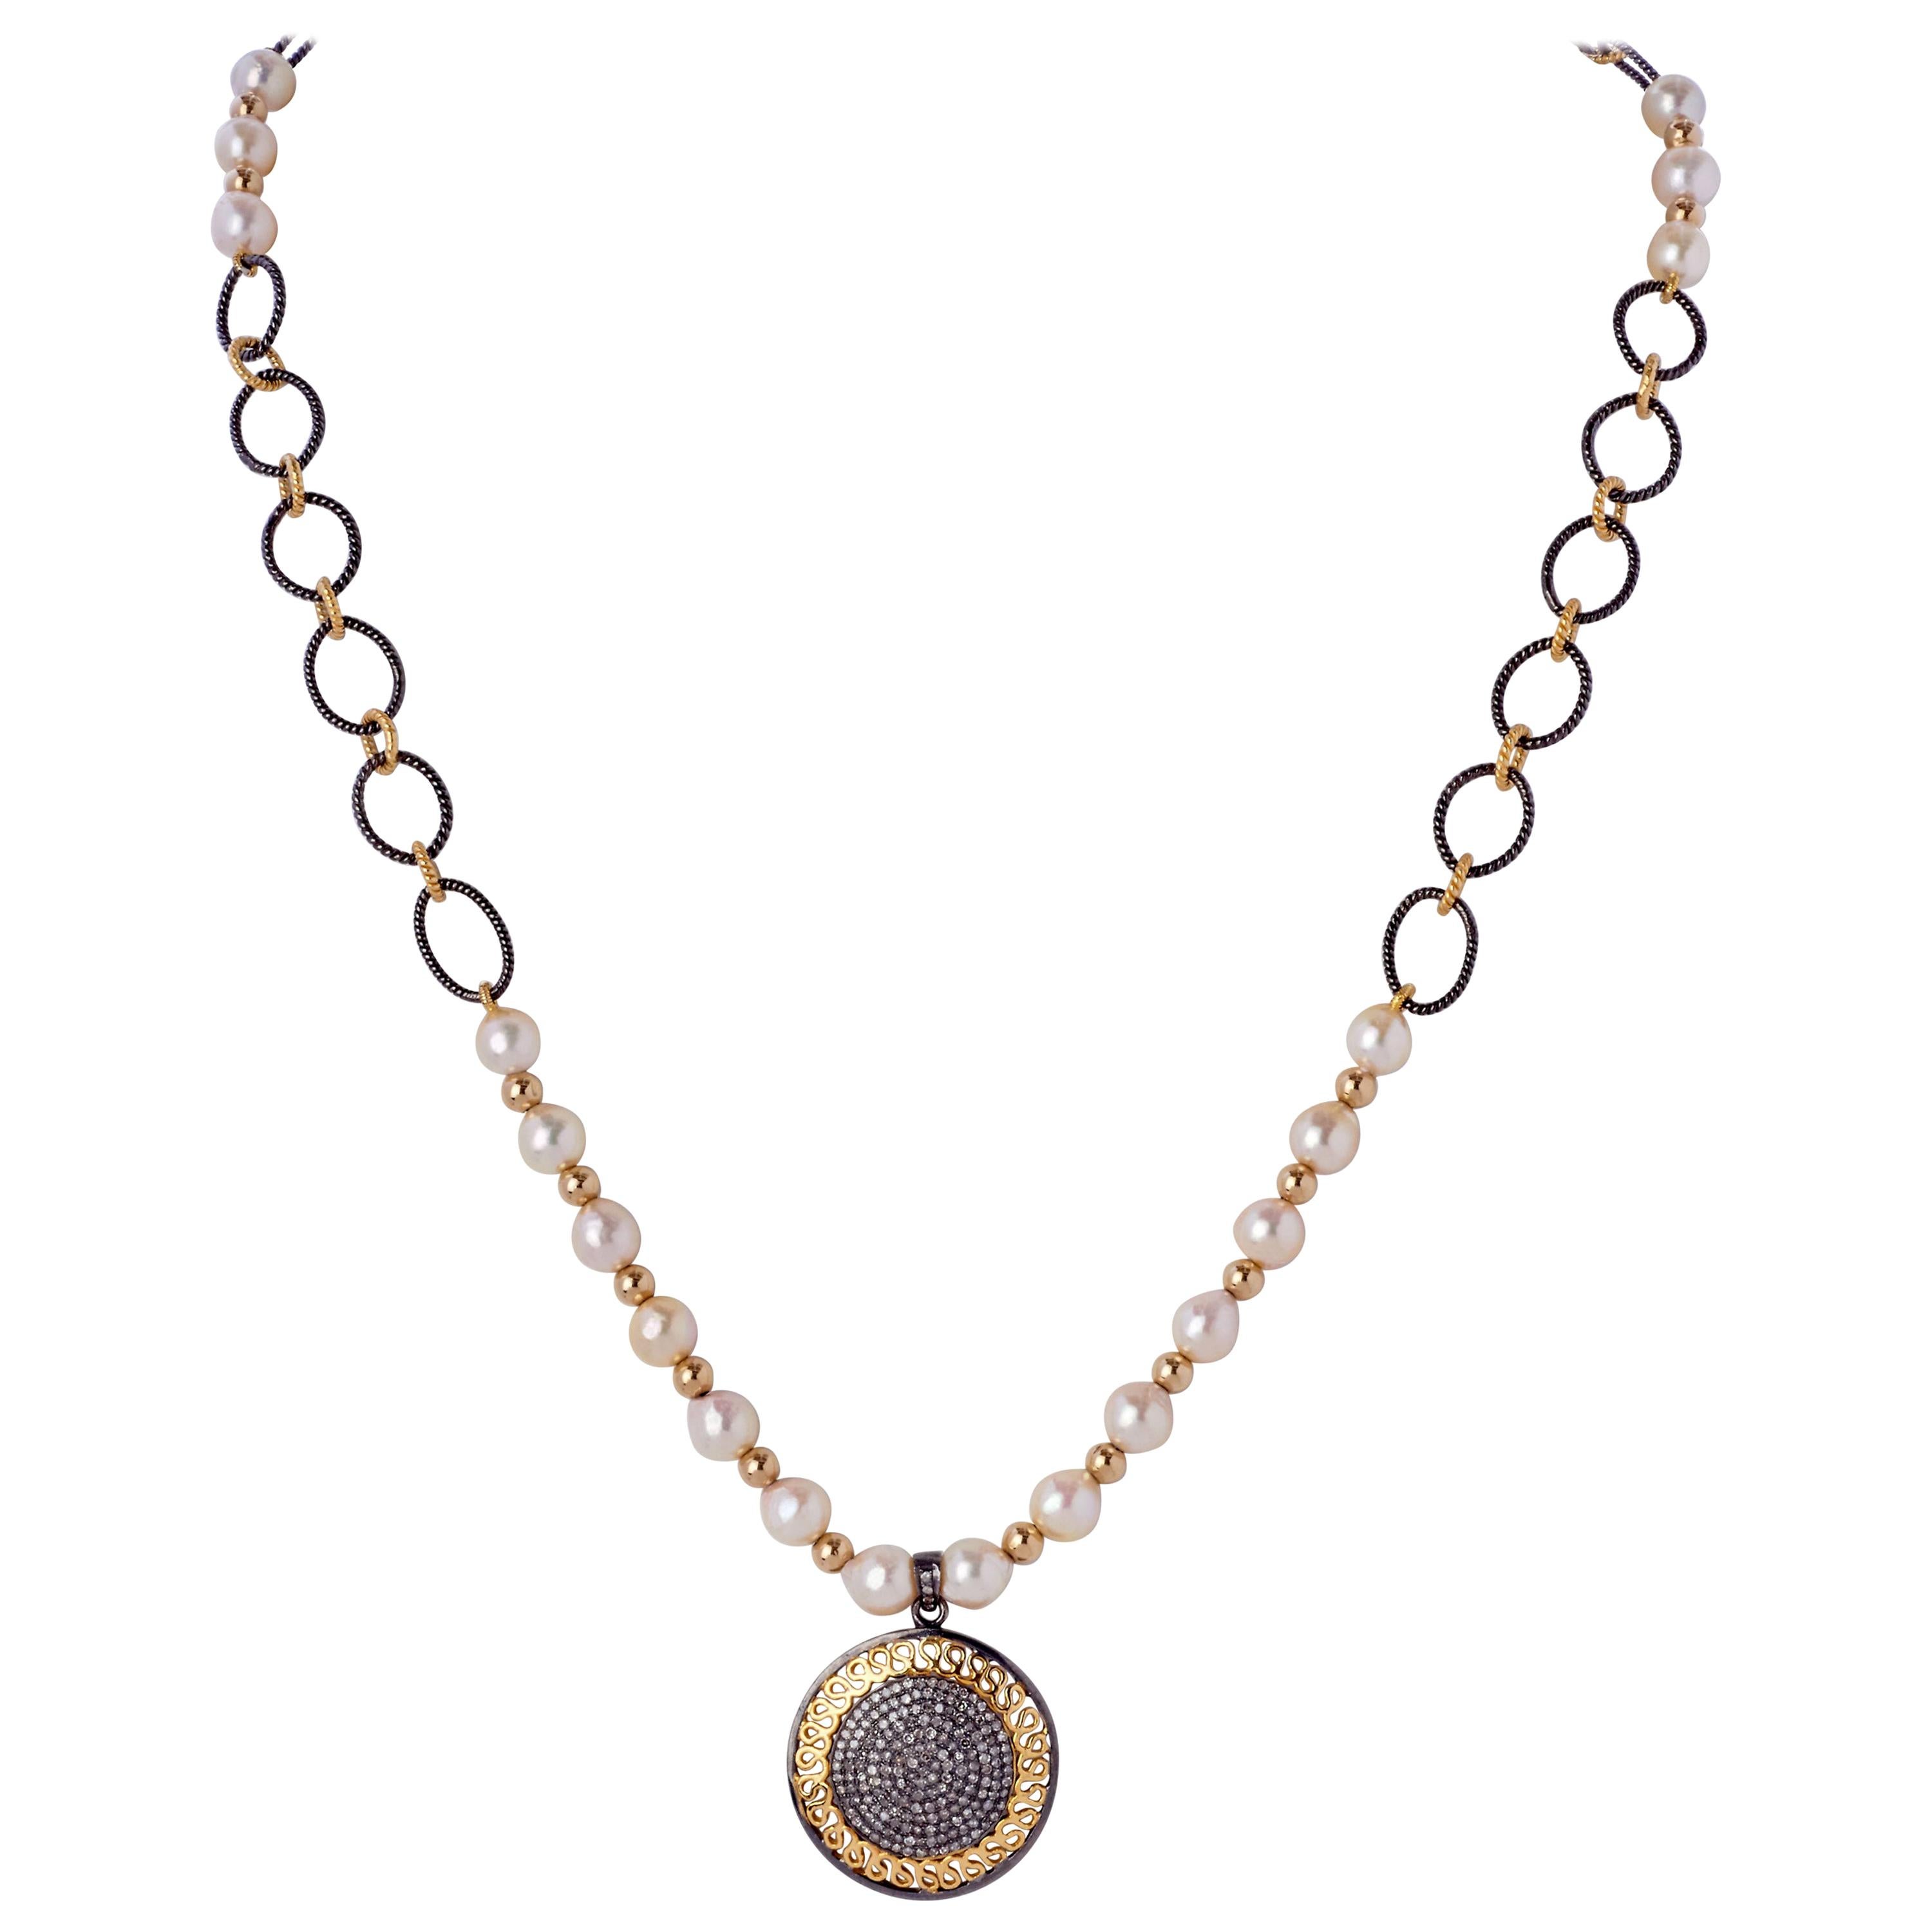 Diamond Silver Medallion Pendant Necklace with Pearls 14K Gold Beads